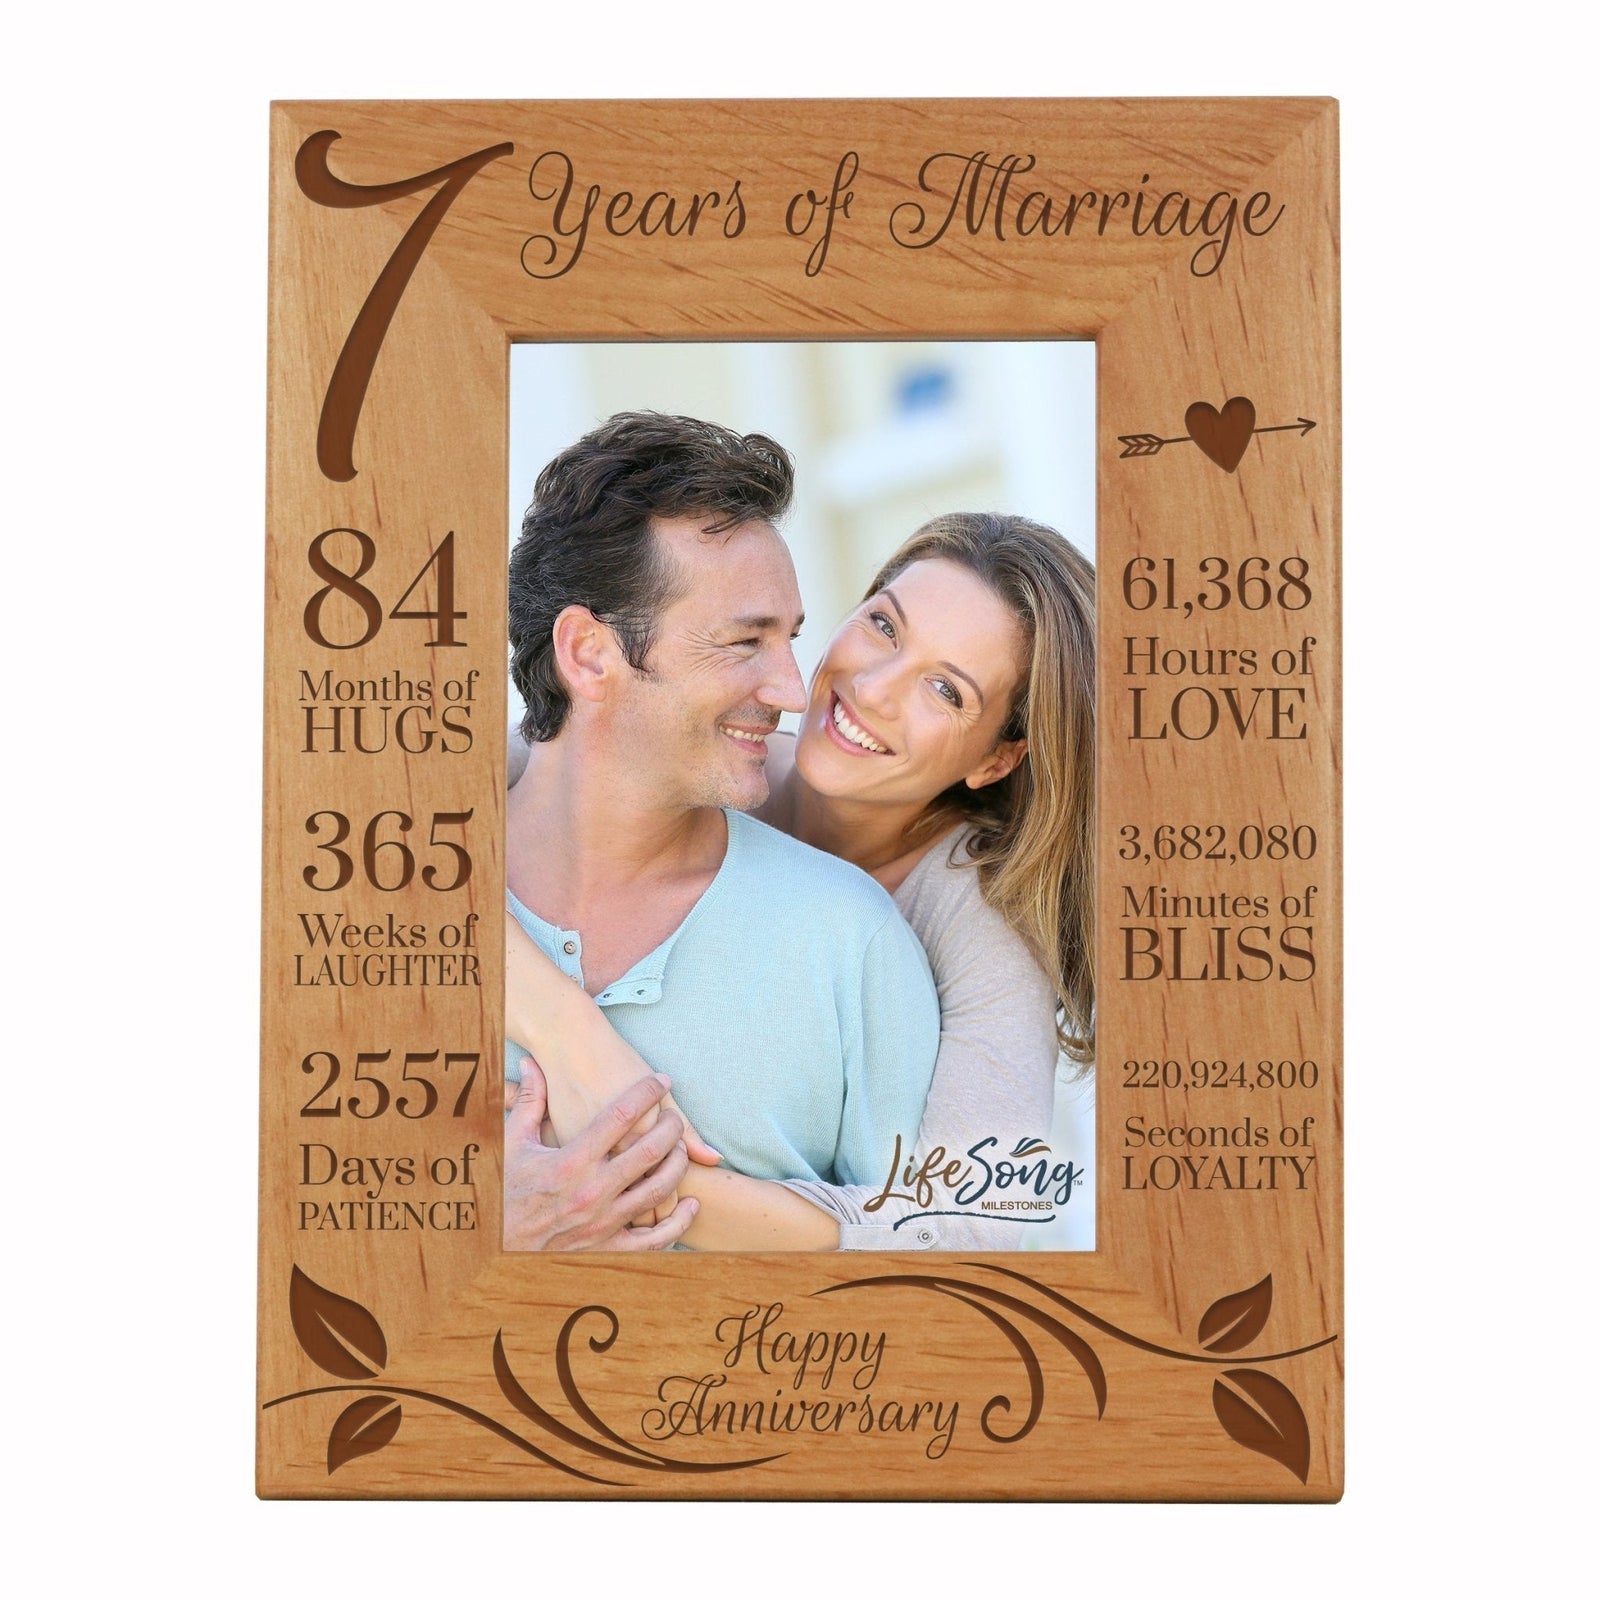 Engraved 7th Wedding Anniversary Photo Frame Wall Decor Gift for Couples - Happy Anniversary - LifeSong Milestones